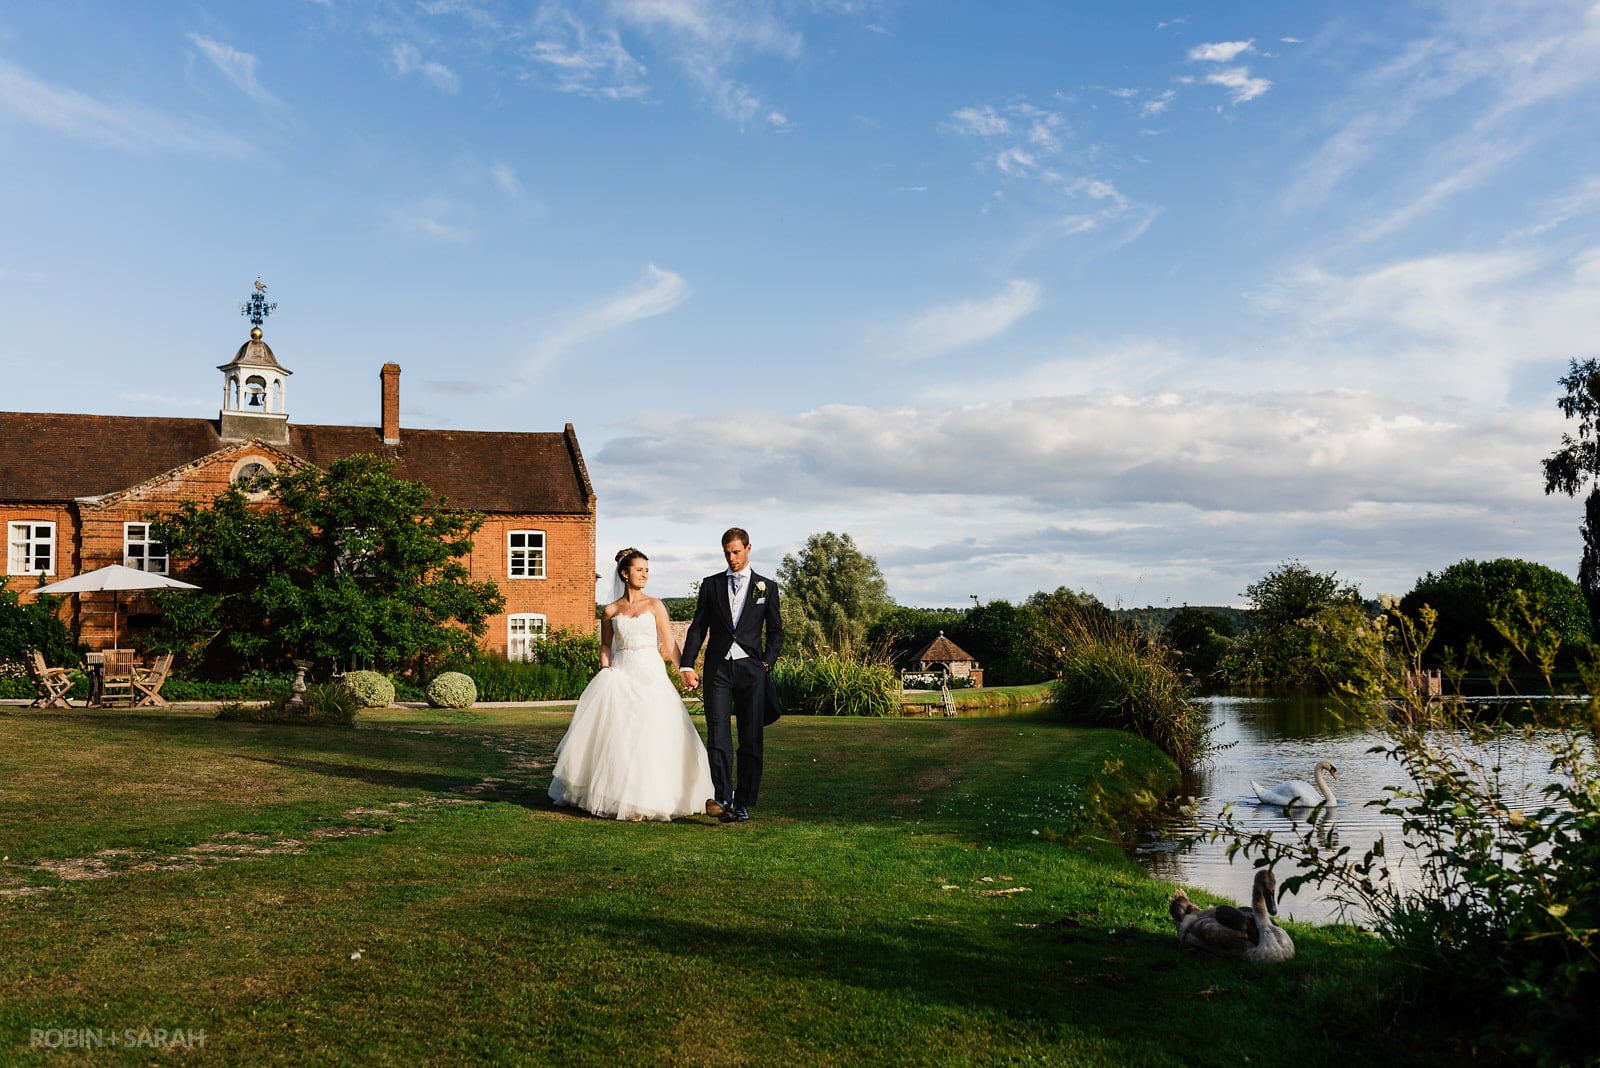 Bride and groom walking next to pond in beautiful gardens at Delbury Hall